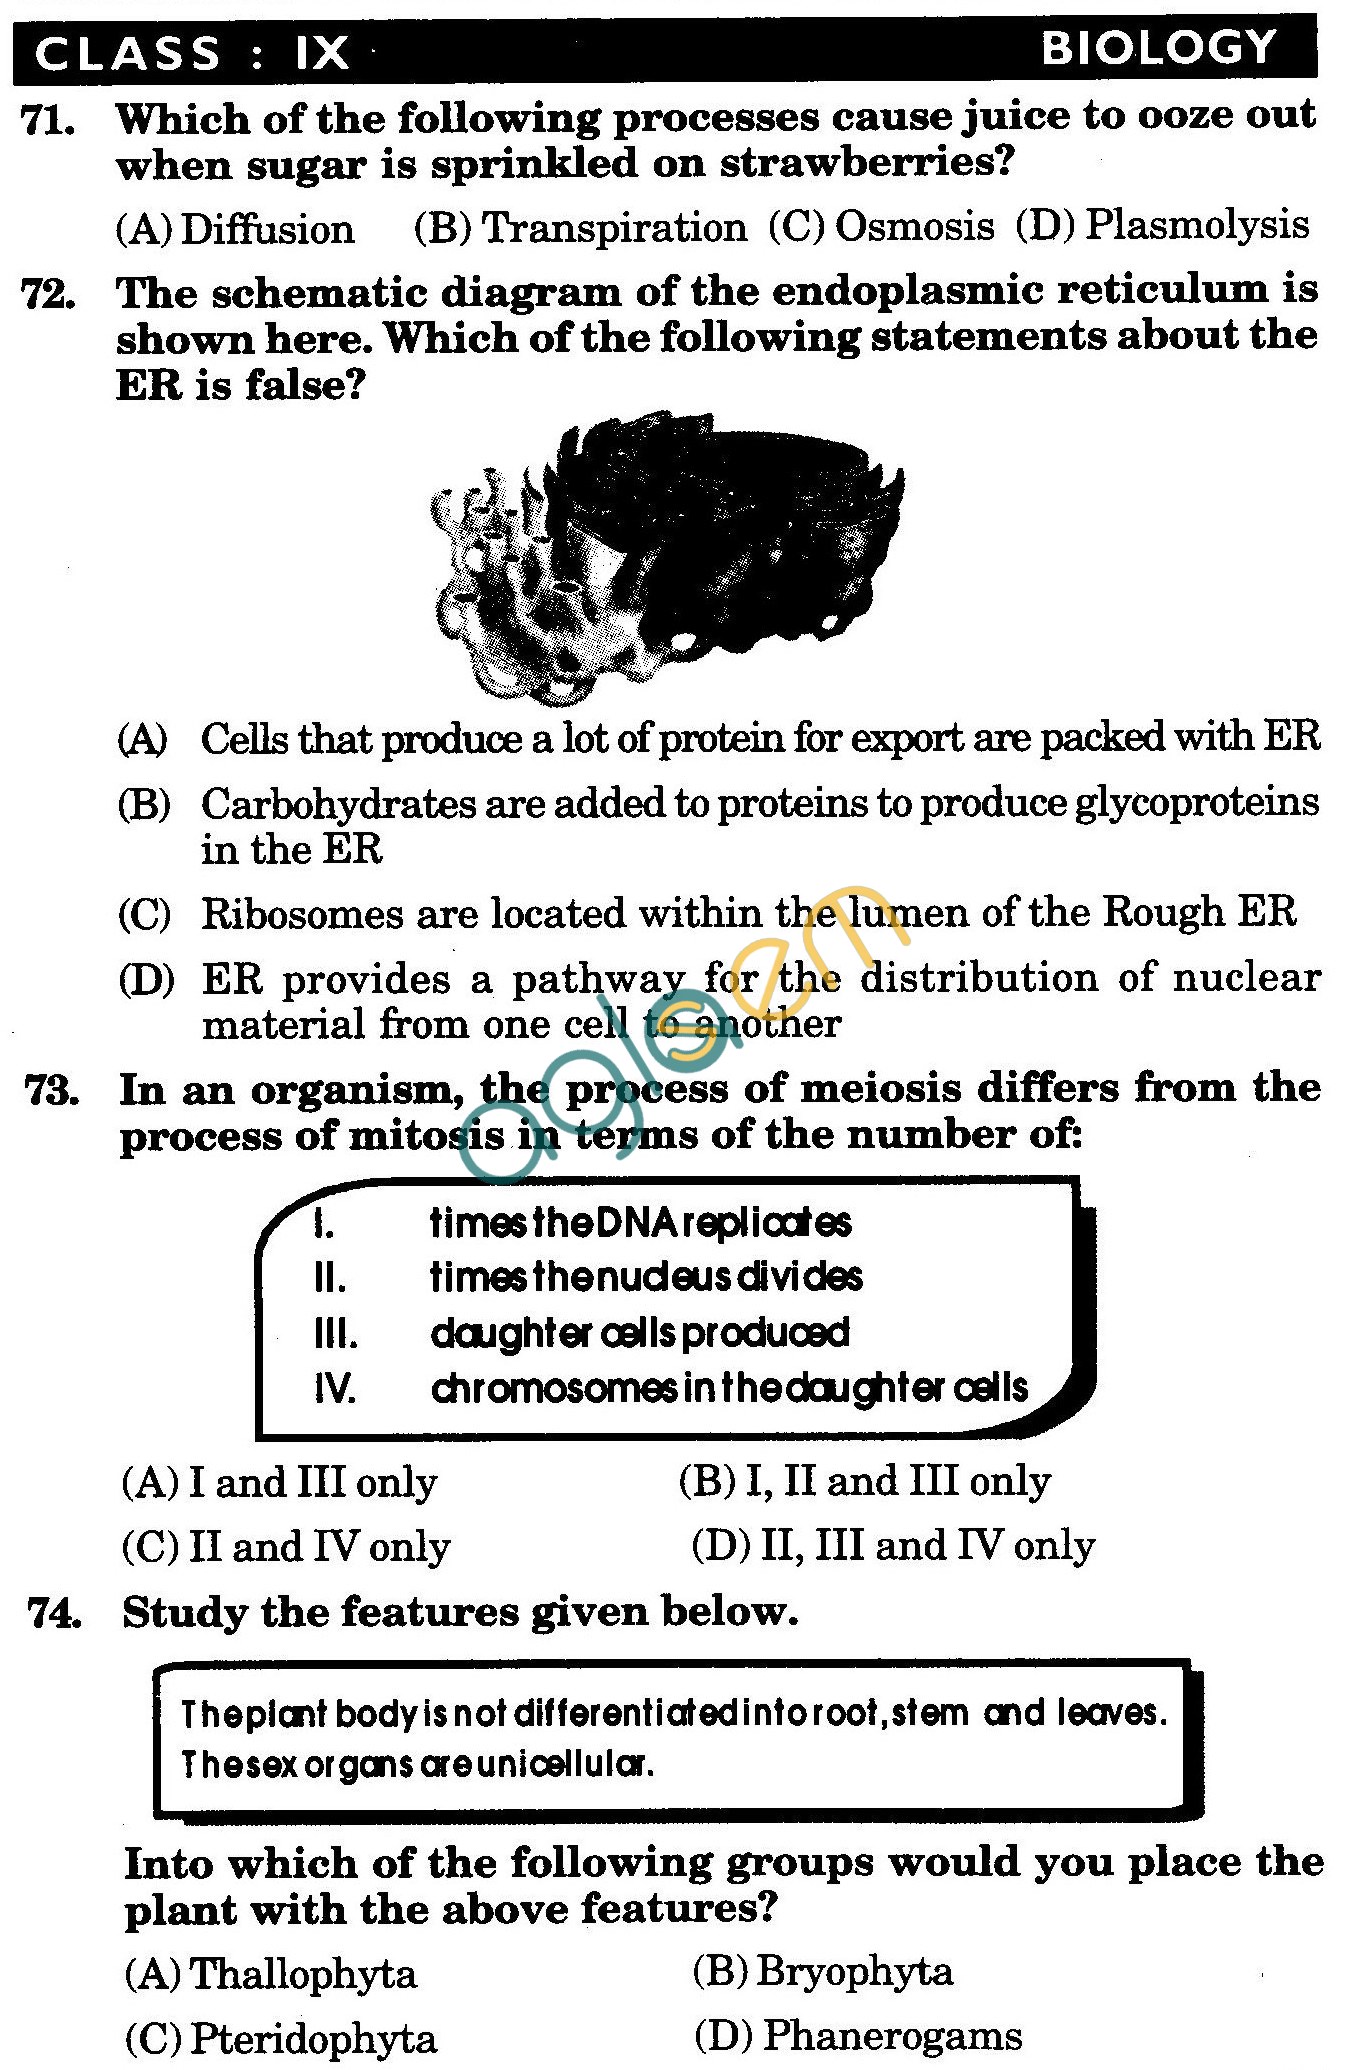 NSTSE 2010: Class IX Question Paper with Answers - Biology